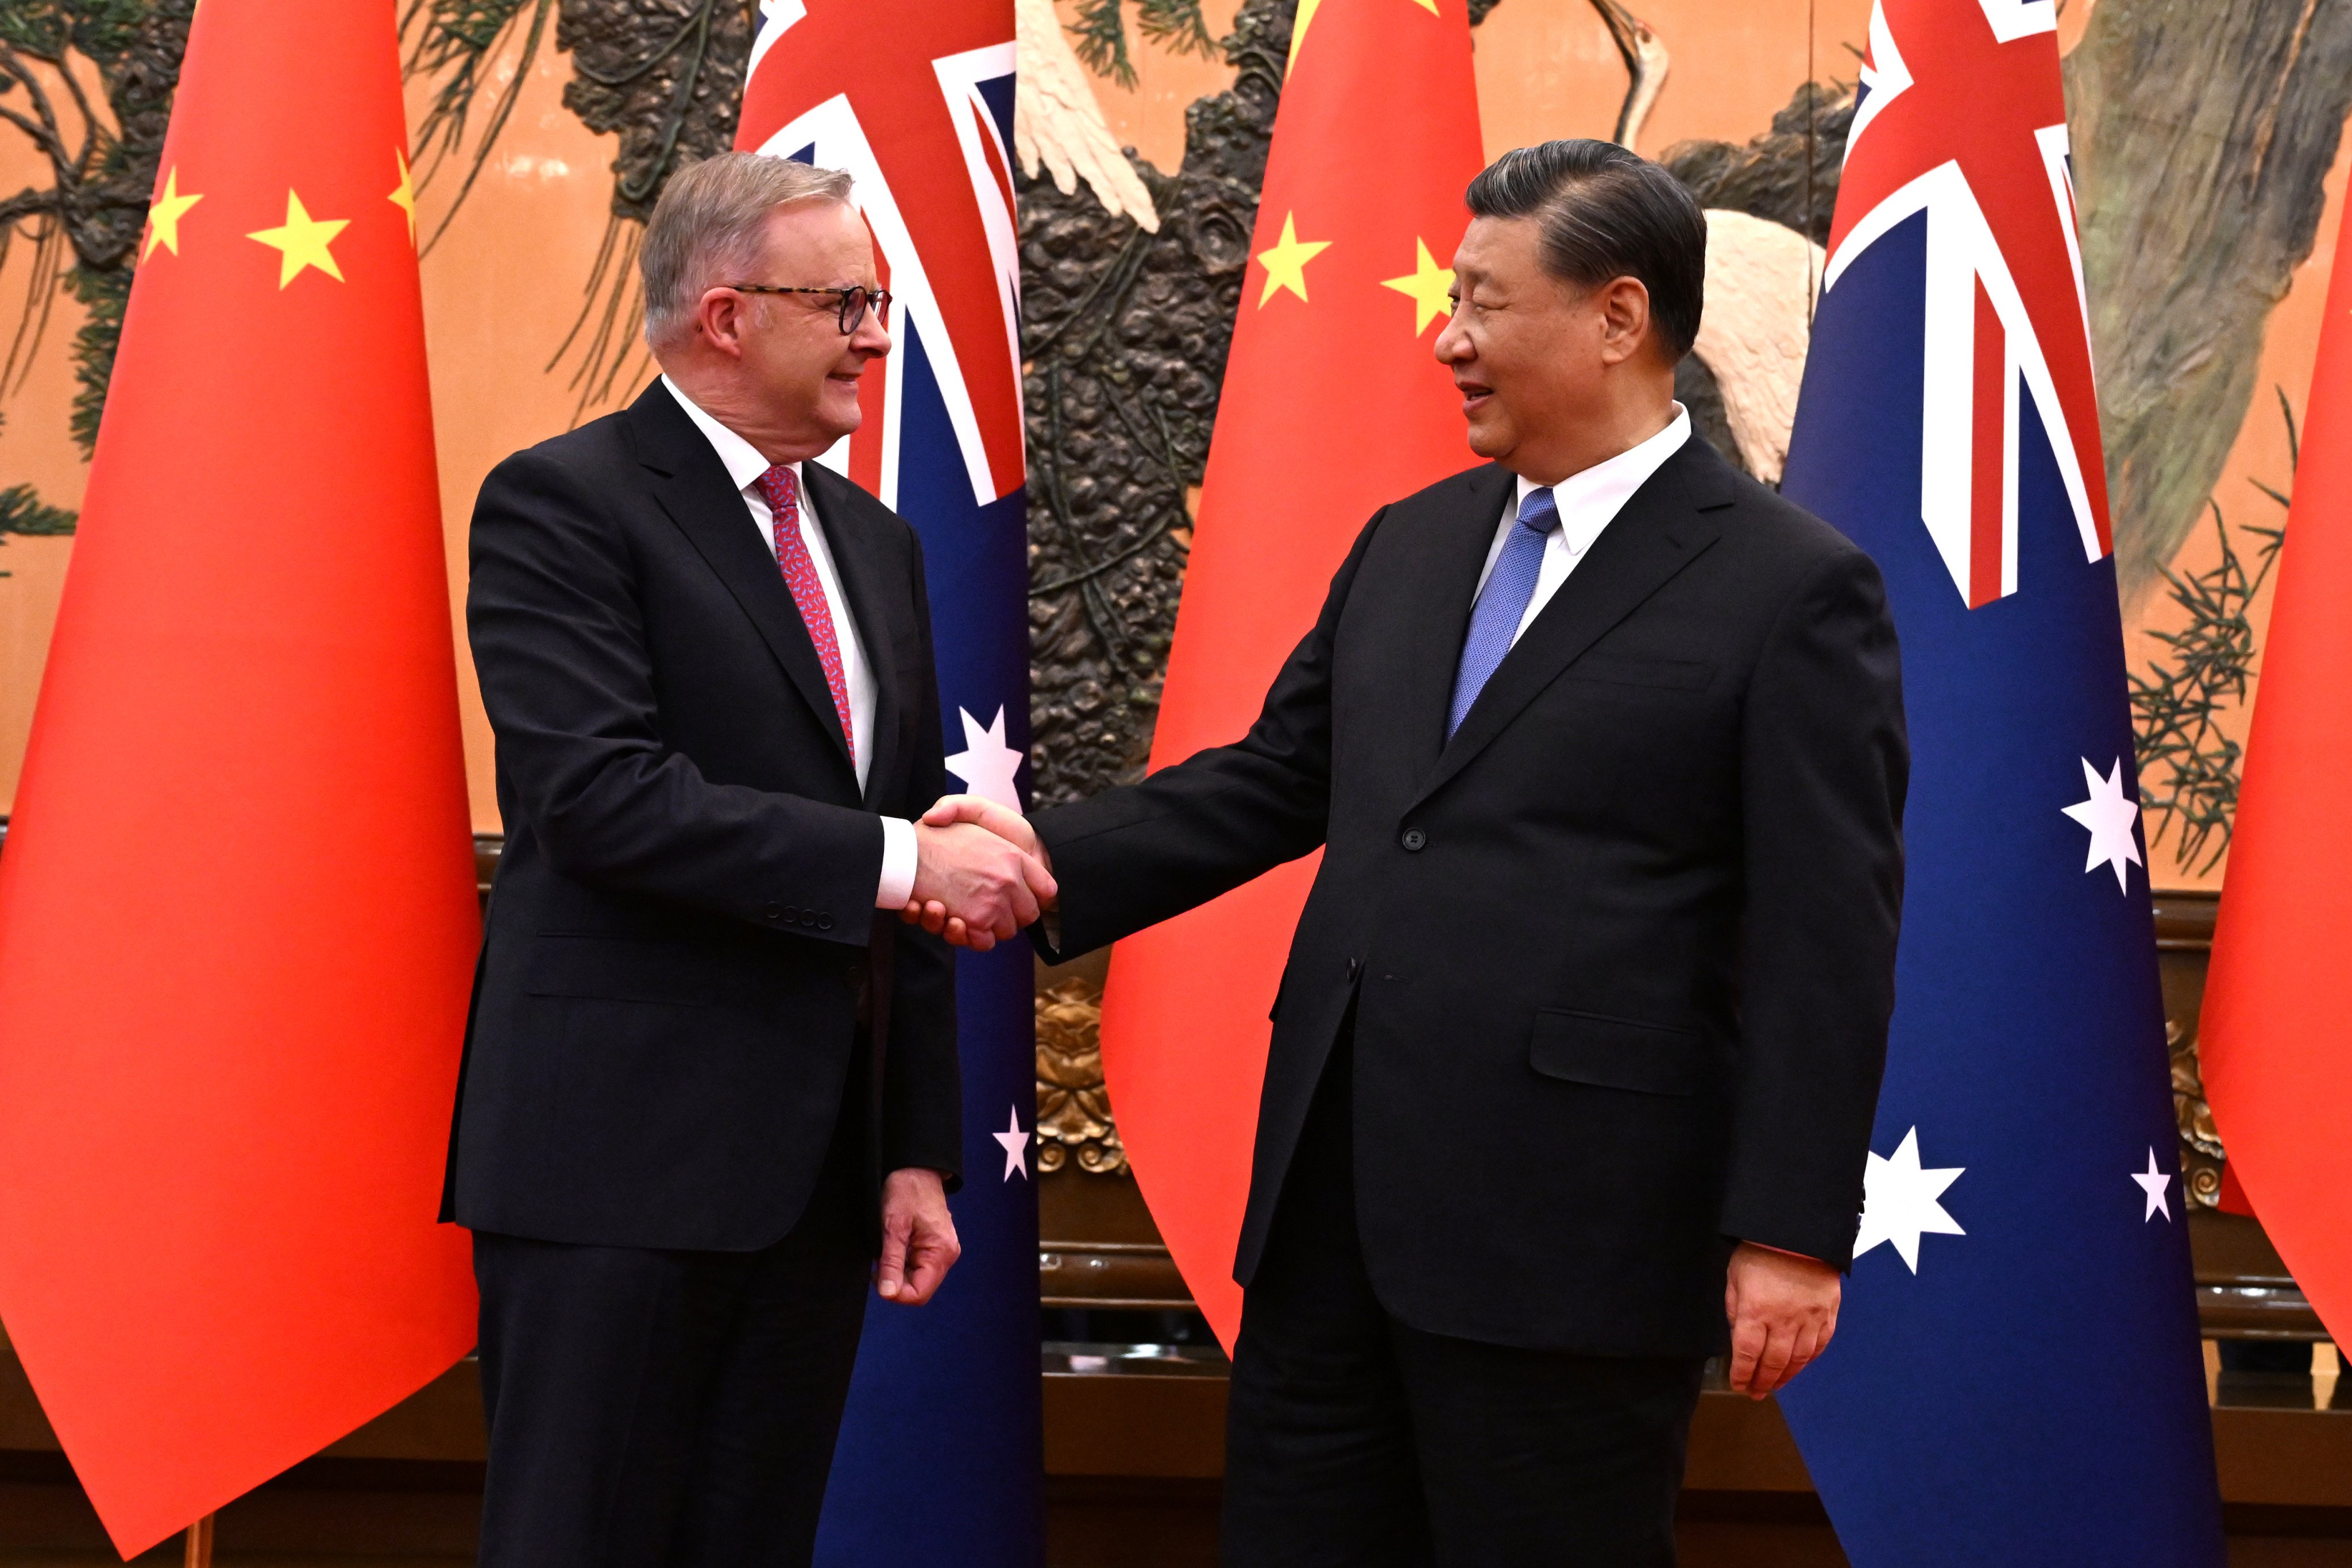 Australian Prime Minister Anthony Albanese (left) meets Chinese President Xi Jinping at the Great Hall of the People in Beijing on Monday. Photo: AAP/dpa